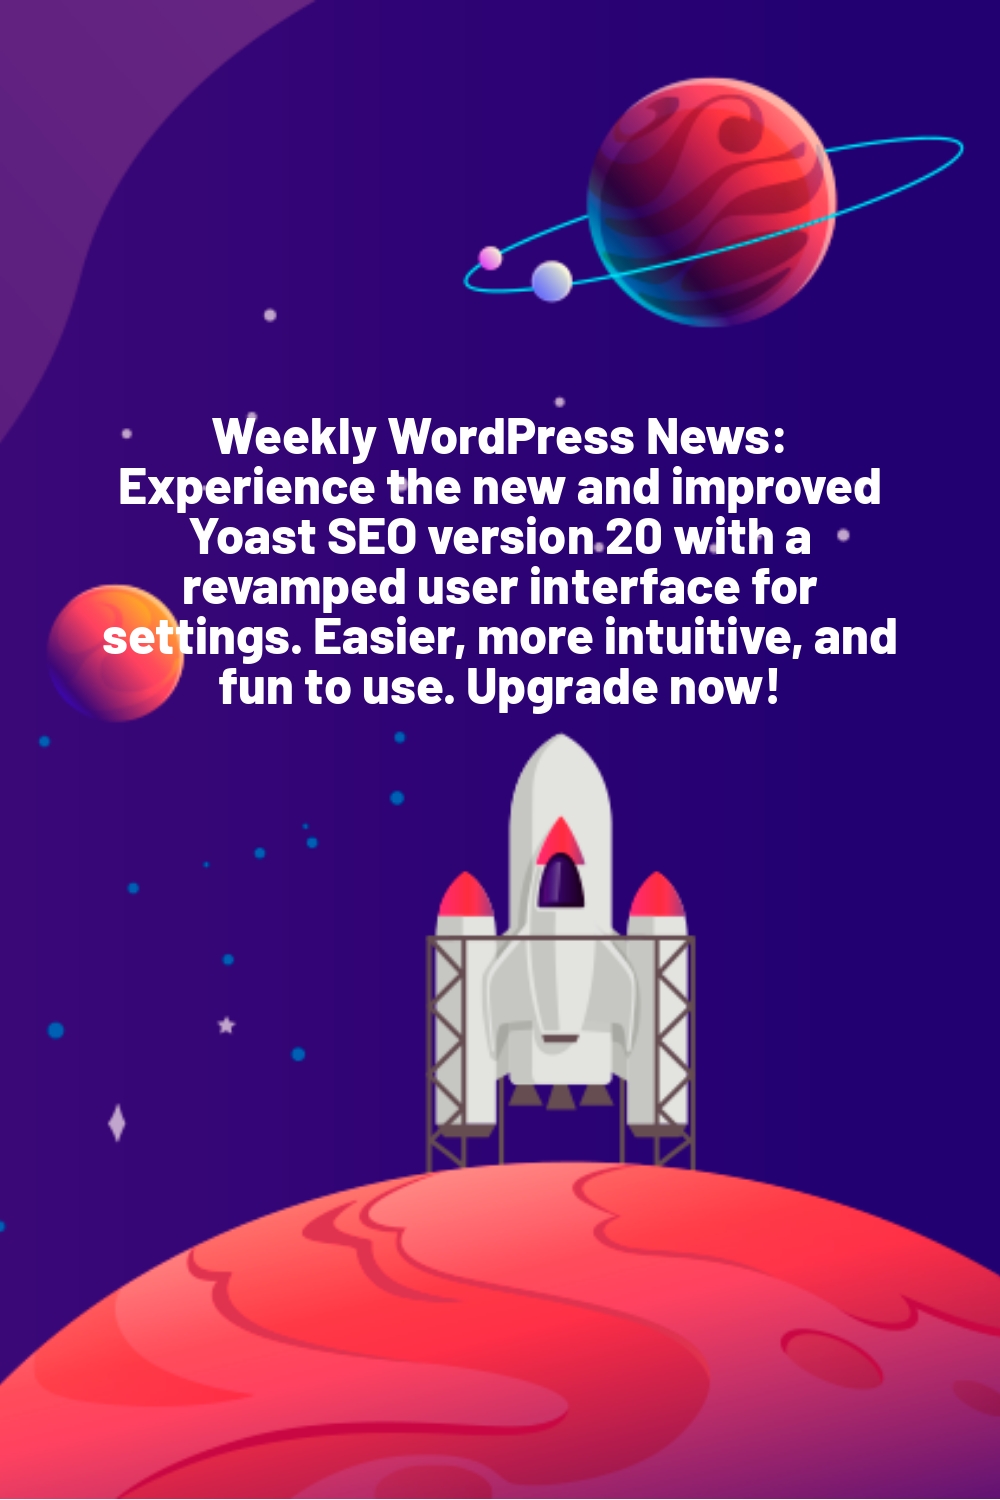 Weekly WordPress News: Experience the new and improved Yoast SEO version 20 with a revamped user interface for settings. Easier, more intuitive, and fun to use. Upgrade now!